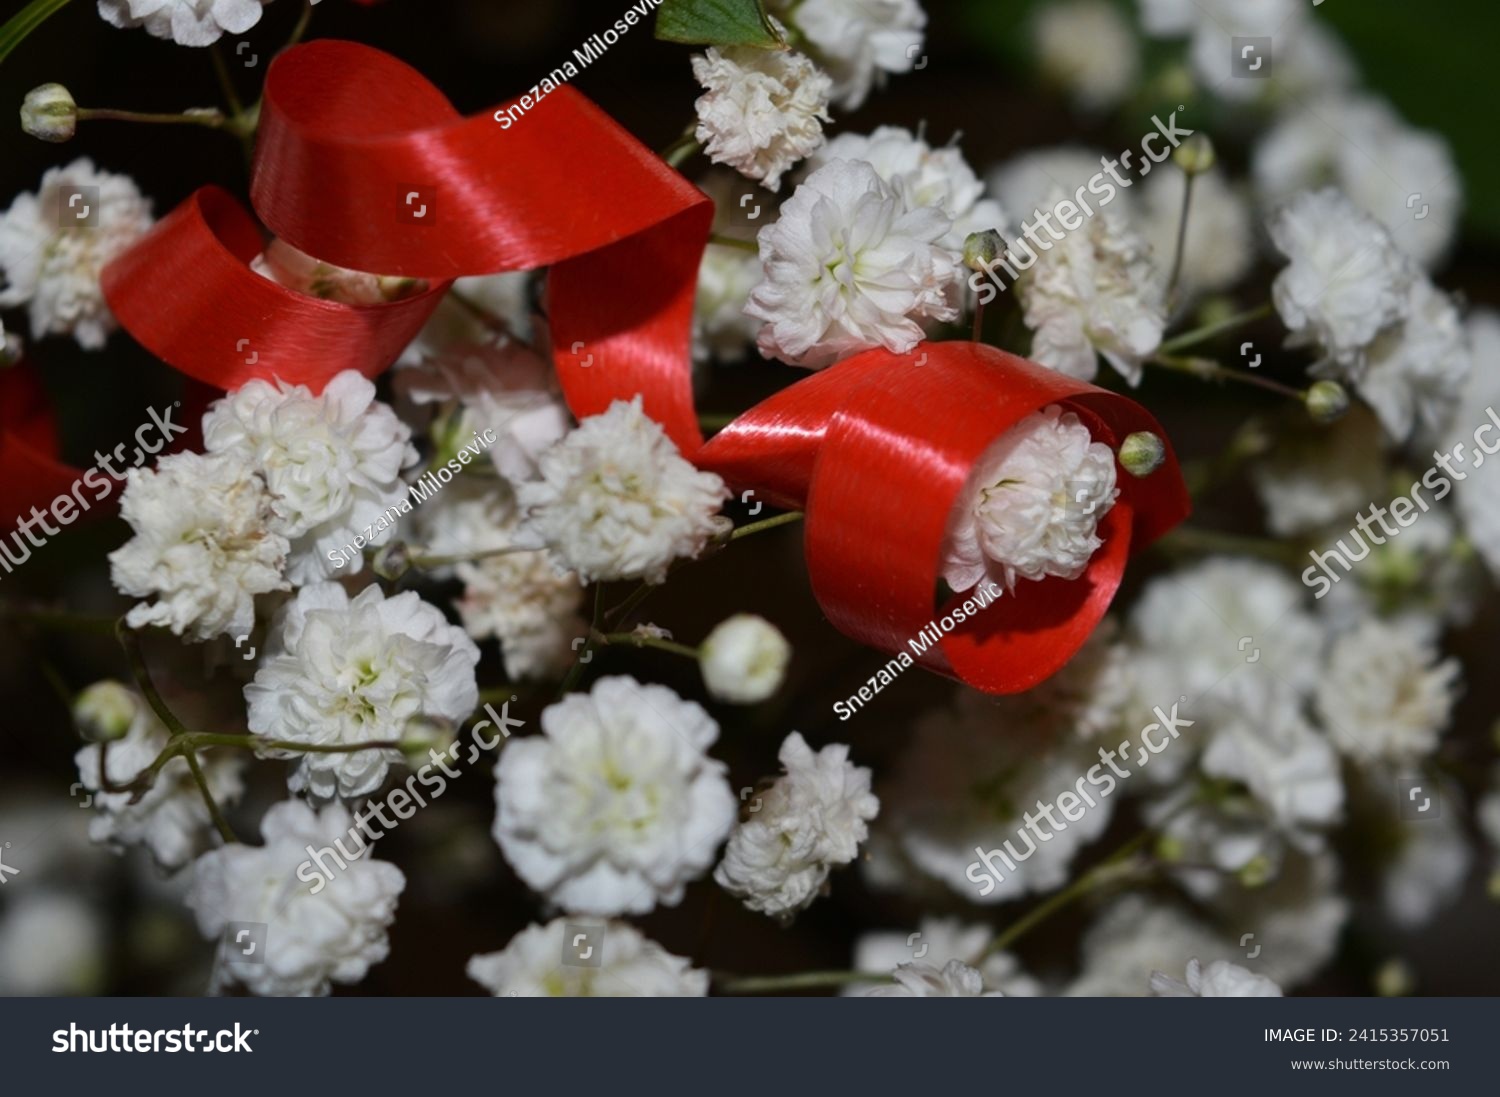 Small white flowers as decoration in bouquets, isolated. Red decorative tape. A close-up shot. #2415357051